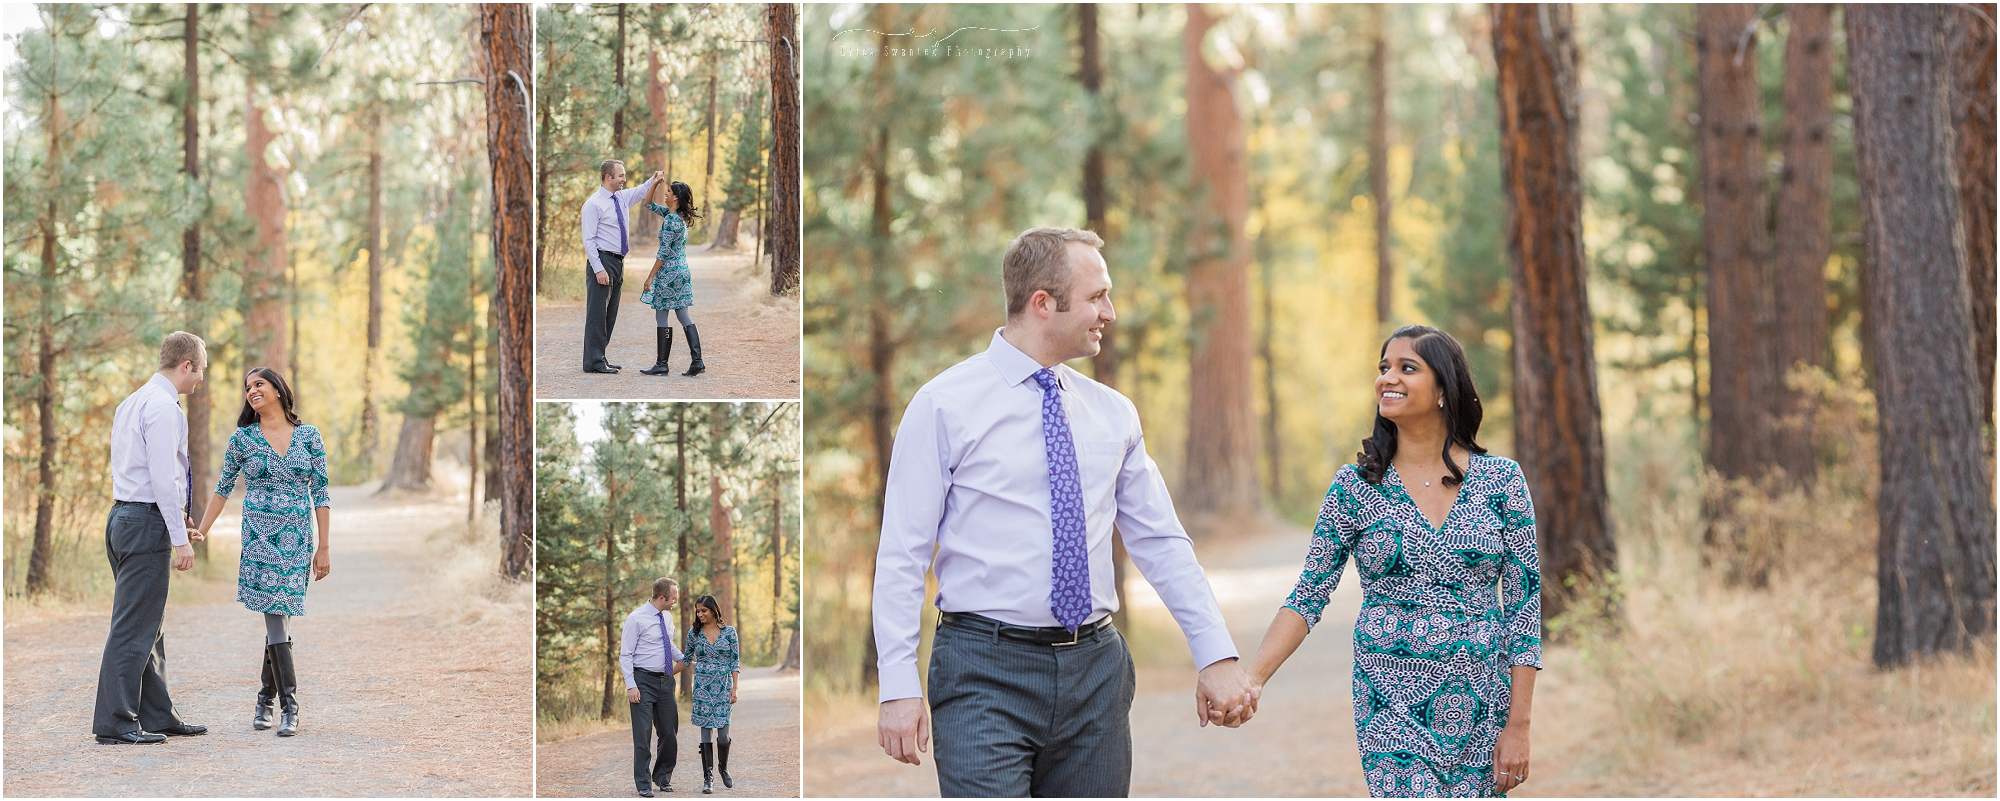 Shevlin Park fall engagement photography for natural couples getting married in Bend, OR. 